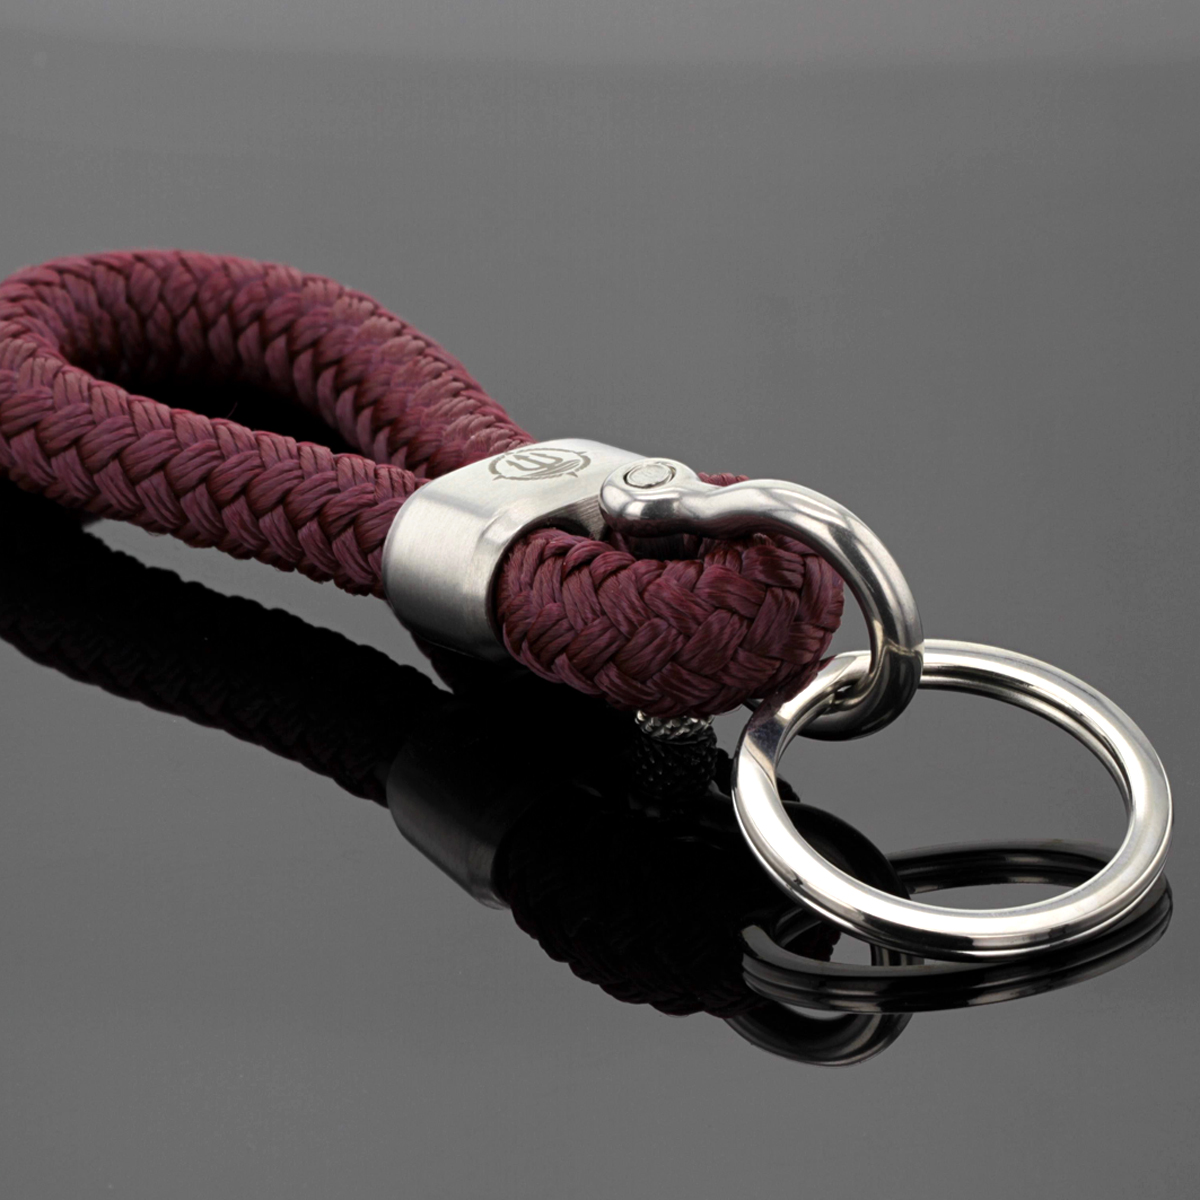 Keychain made of marine rope in a burgundy colour with stainless steel.